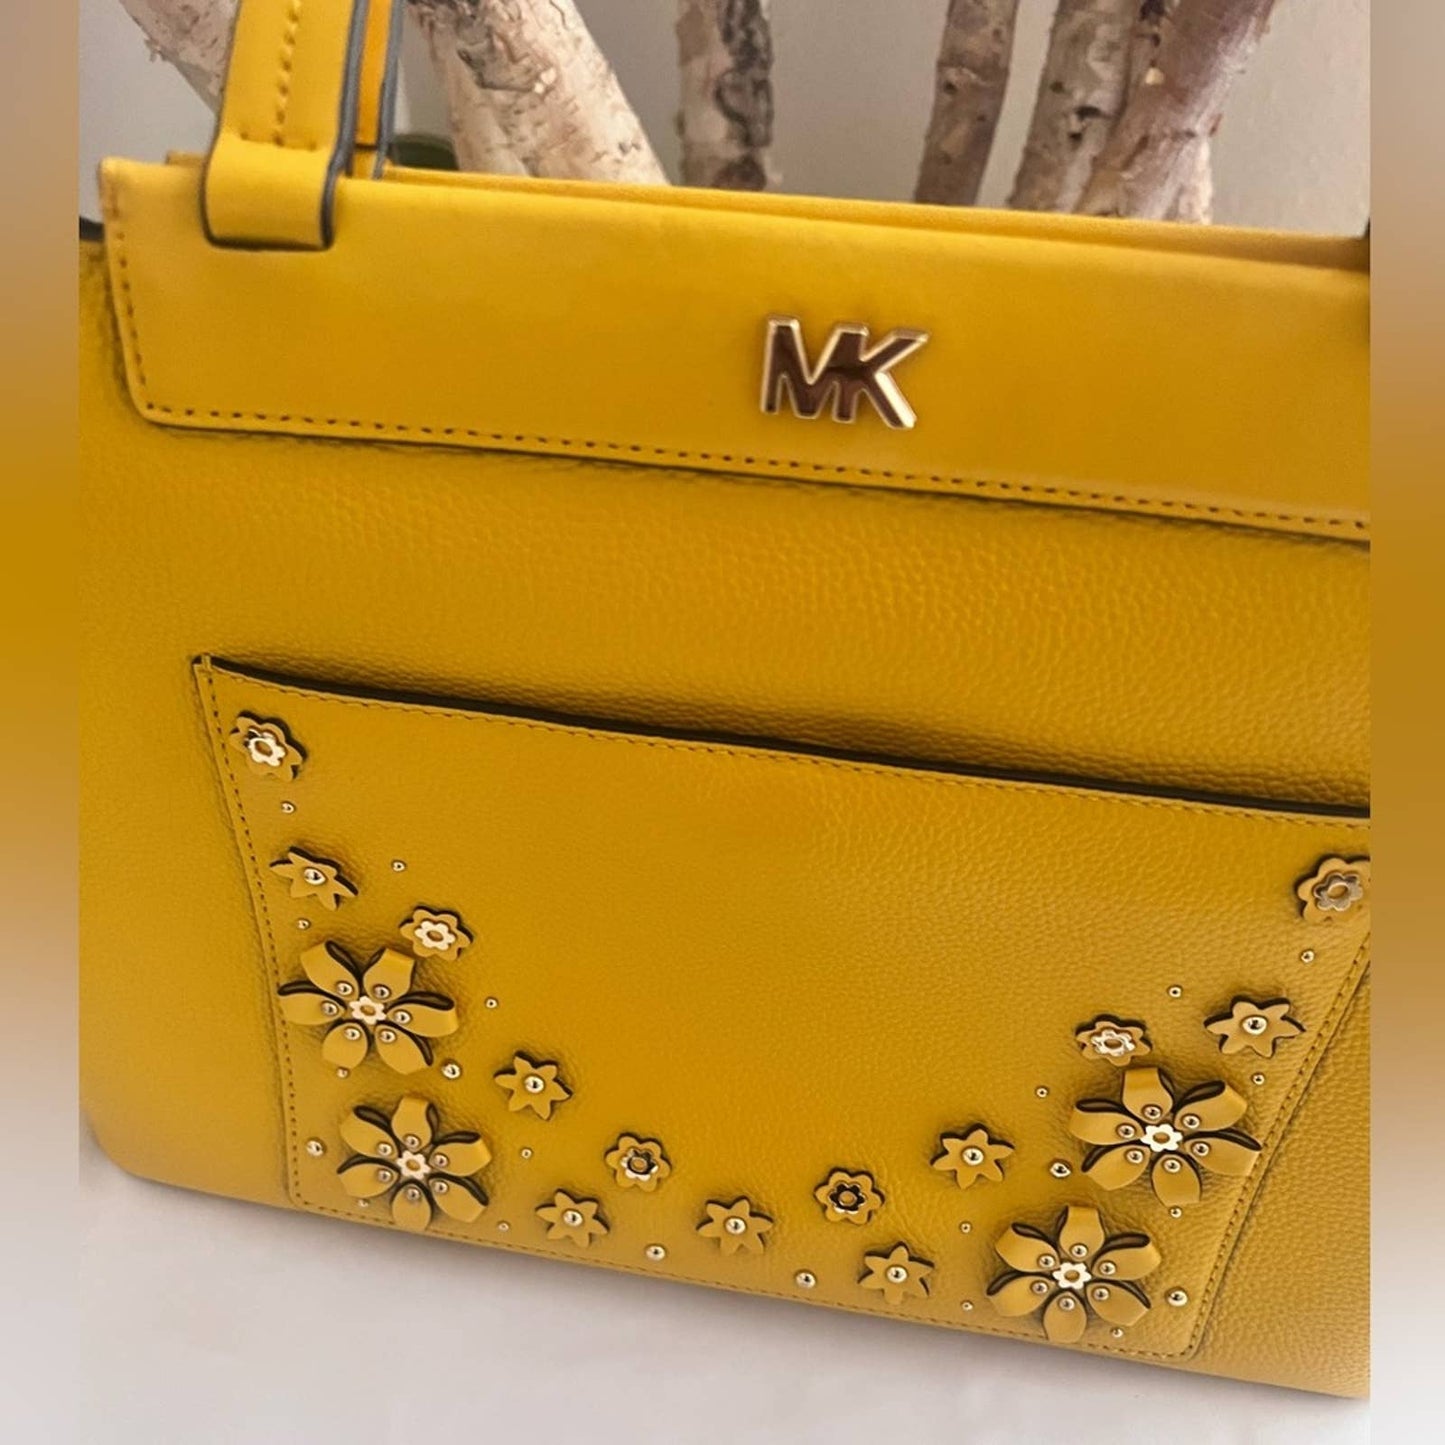 MICHAEL Michael KORS Yellow Meridith Sunflower Leather Tote NWT $298